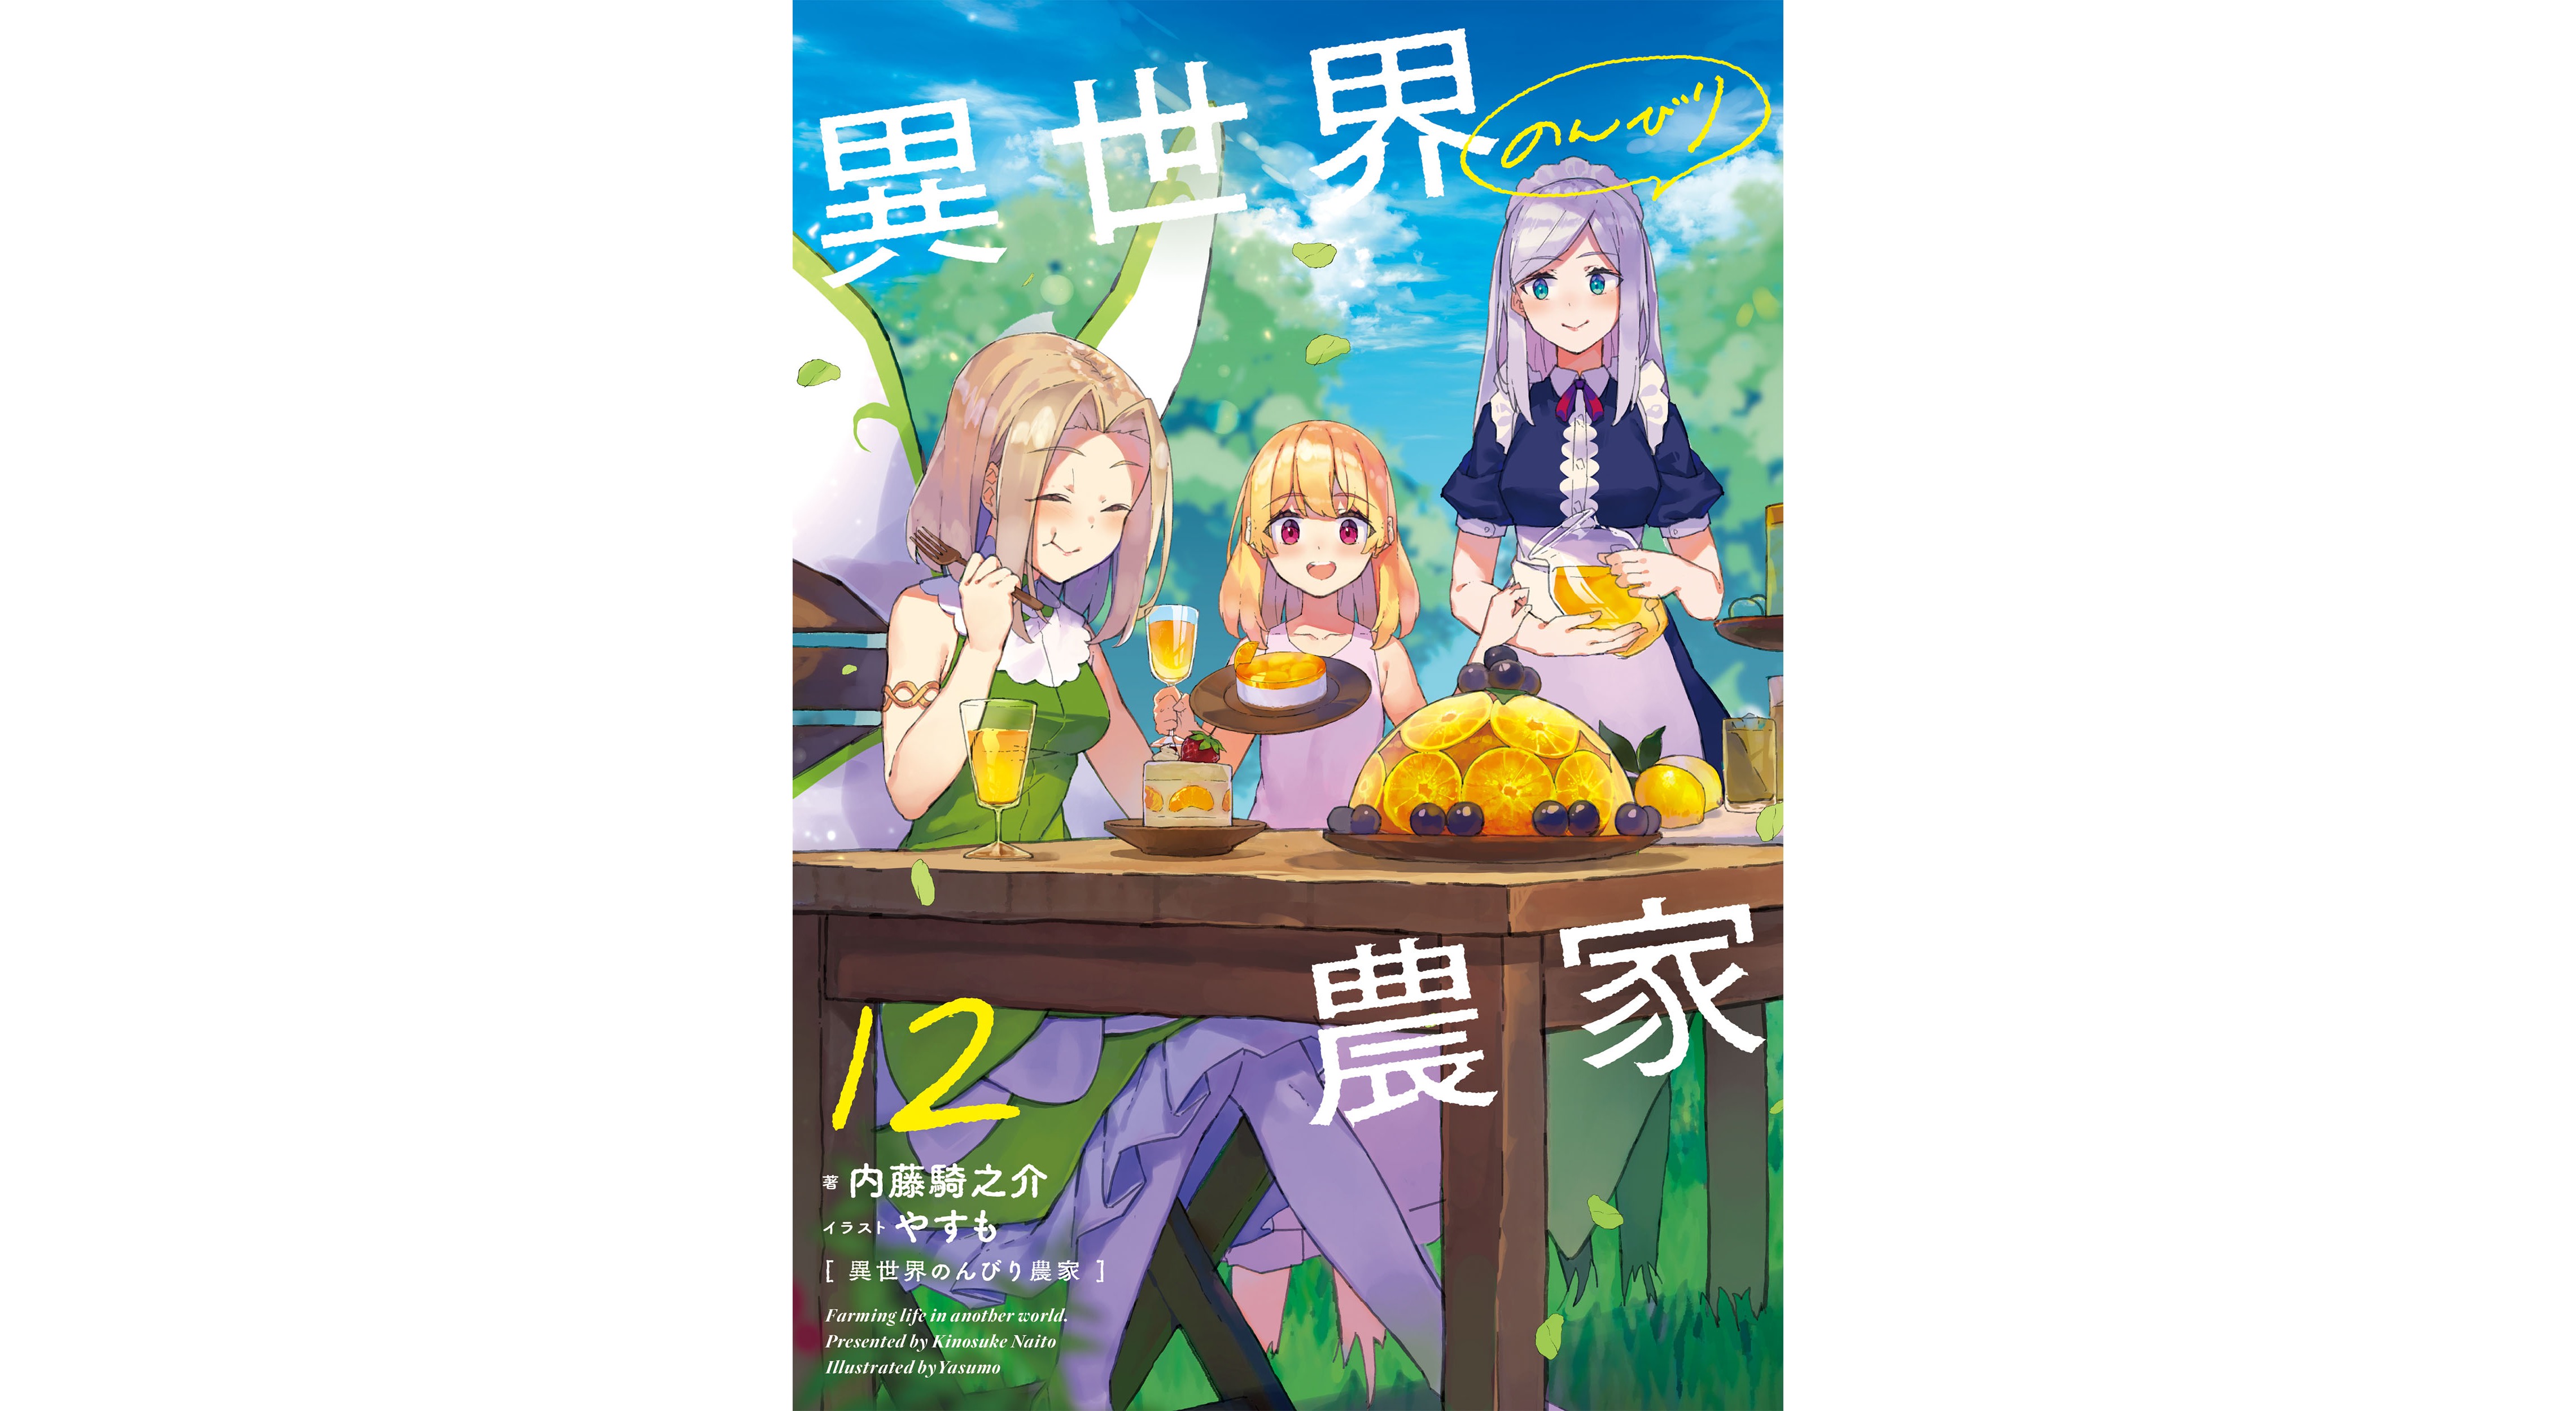 Farming Life in Another World' Isekai Manga Is Getting An Anime Adaption